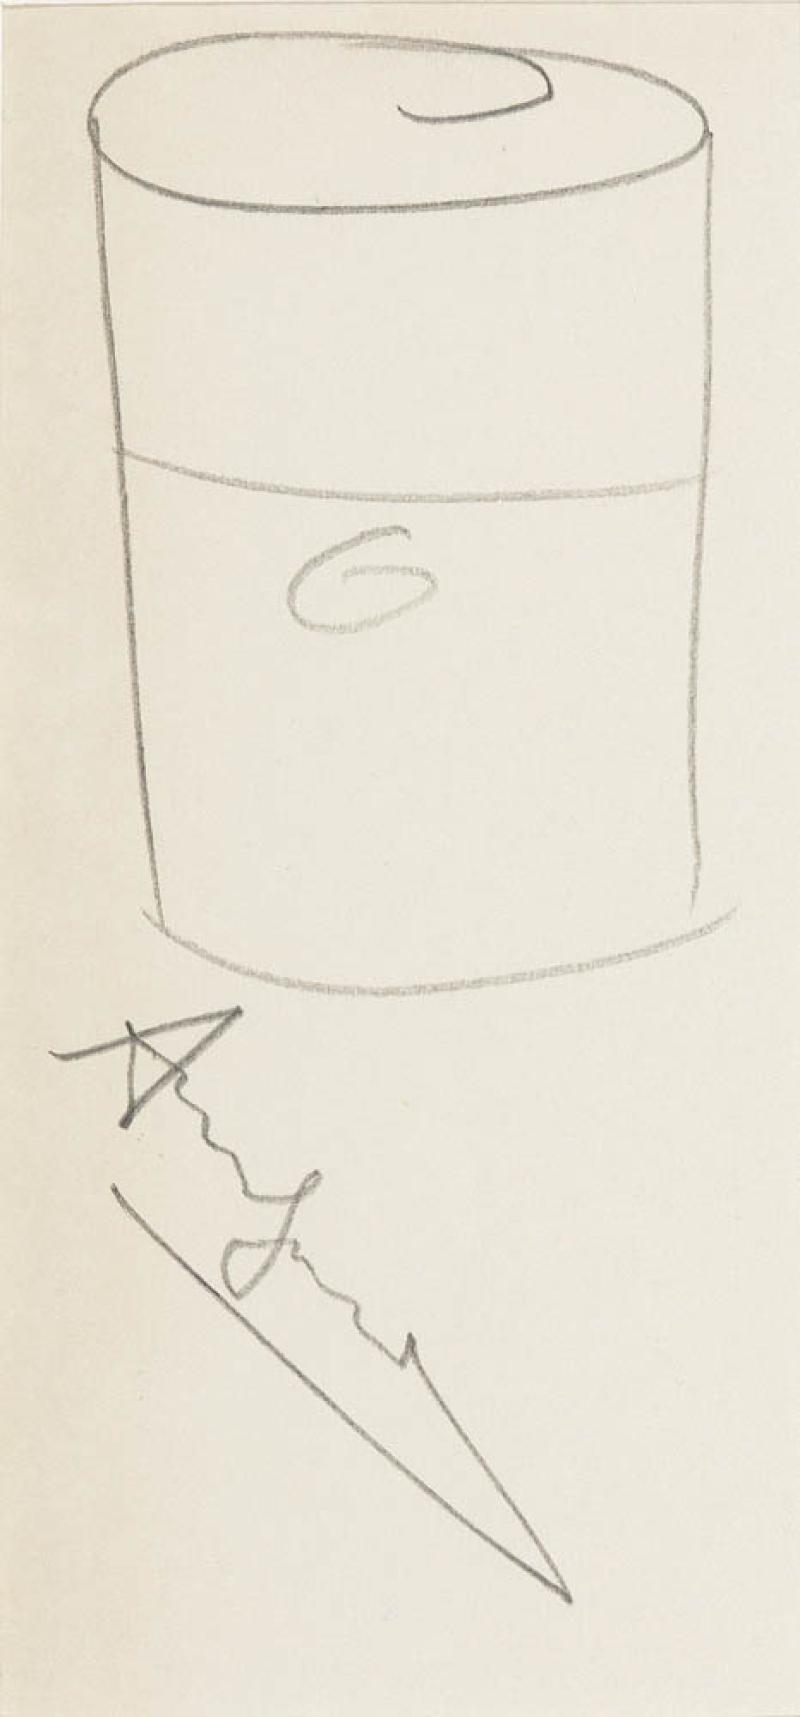 ANDY WARHOL - Untitled (Soup Can)